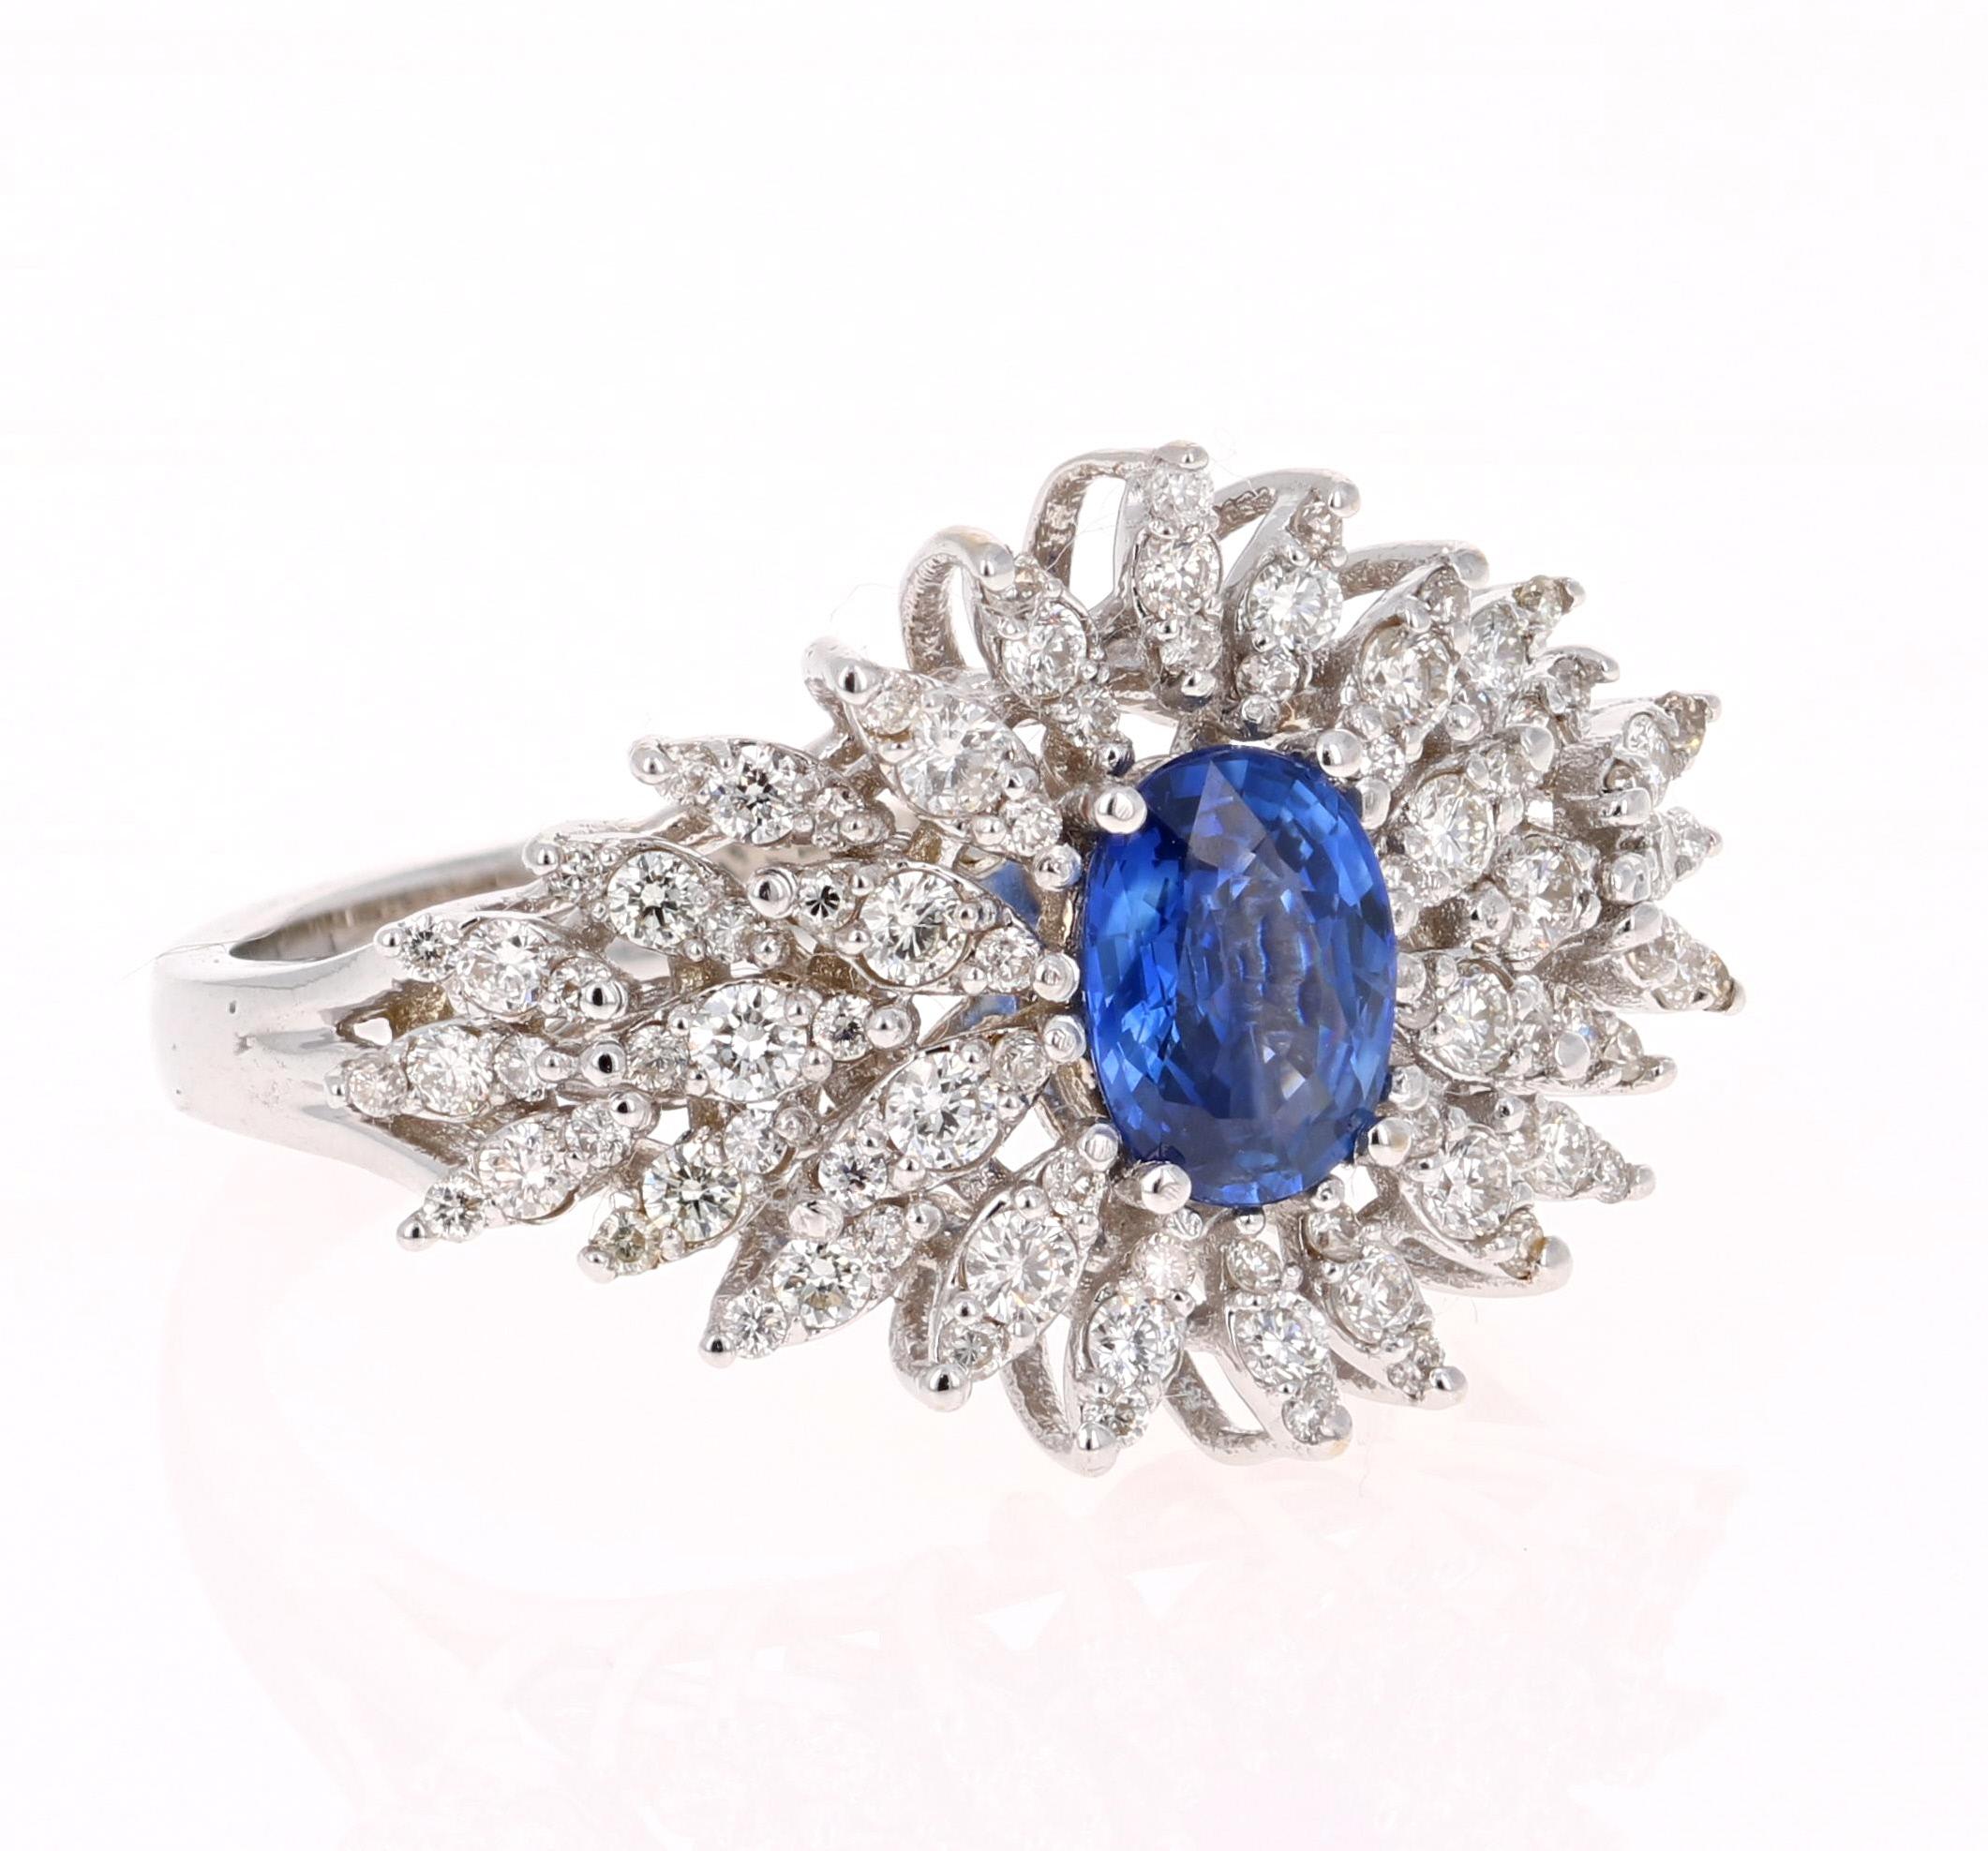 Cute and uniquely designed Oval Cut Sapphire and Diamond Cluster ring that is sure to elevate your accessory collection!  The Sapphire weighs 1.00 carats and is surrounded by 90 Round Cut Diamonds that weigh 0.72 carats.  
This ring is made in 14K